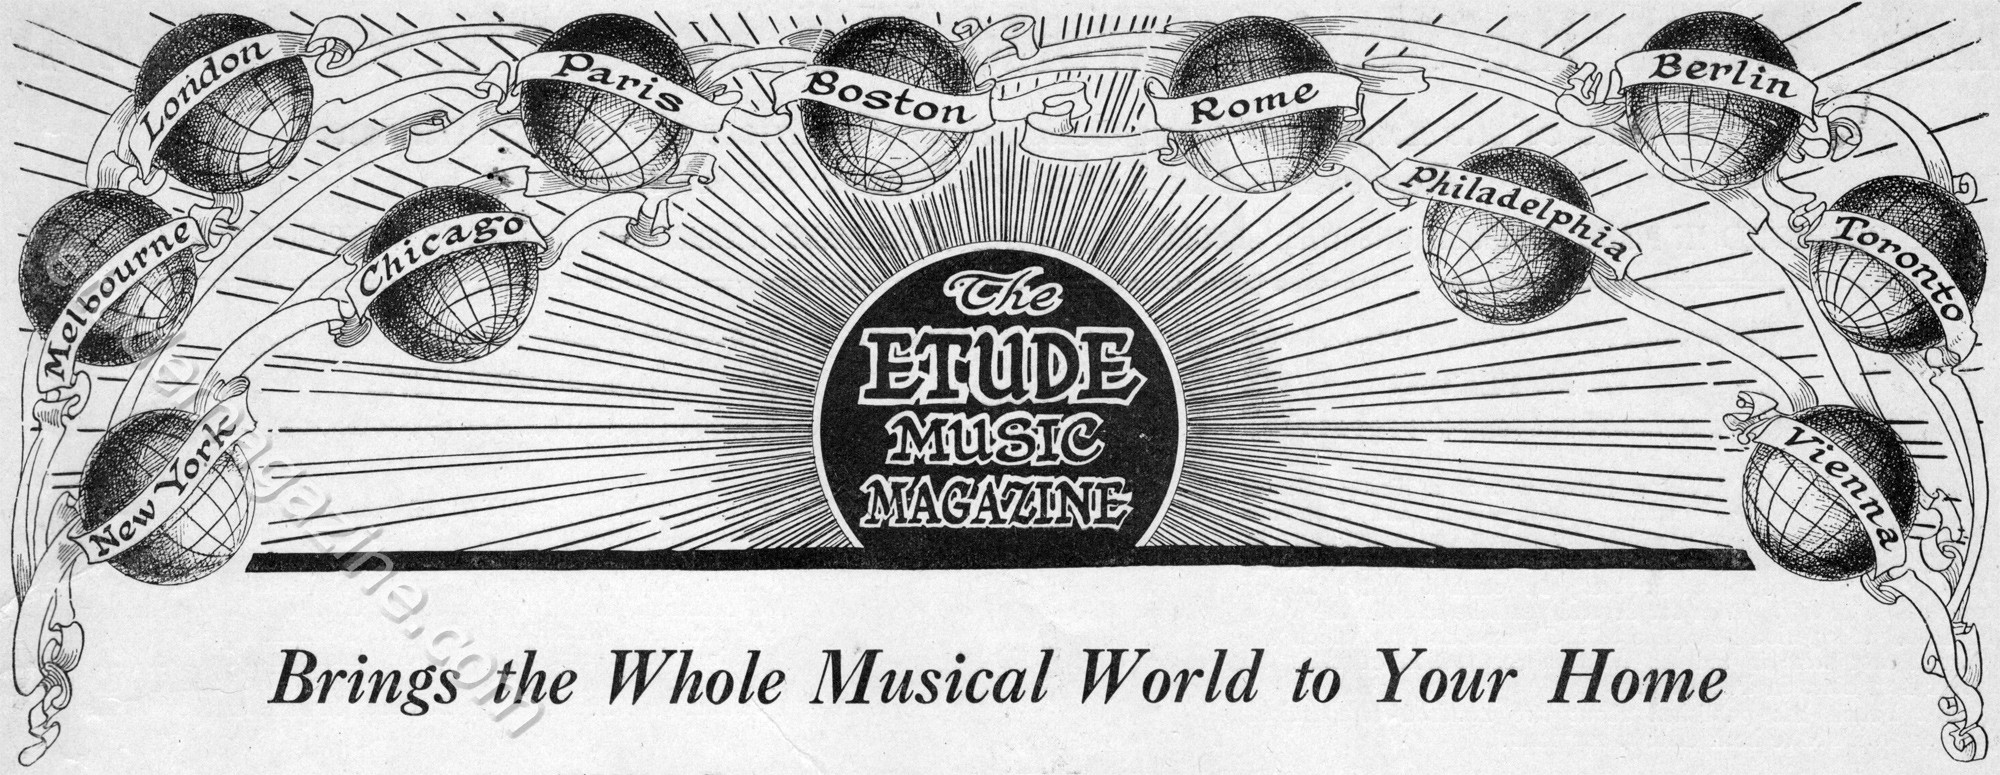 The Etude Music Magazine Brings the Whole Musical World Into Your Home